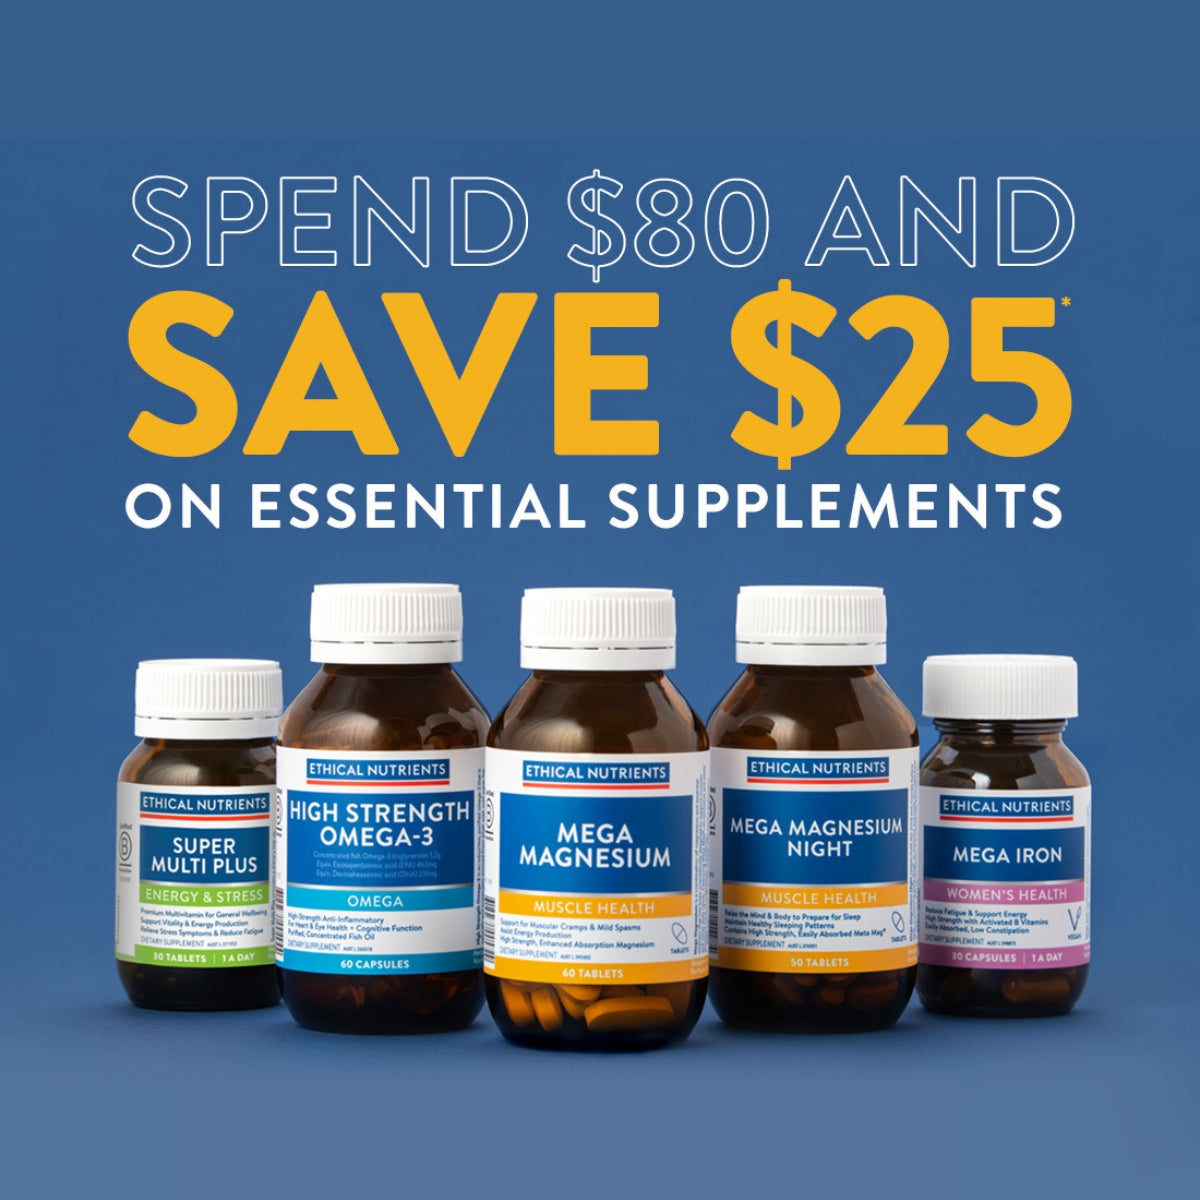 Spend $80 and Save $25 on Essential Supplements